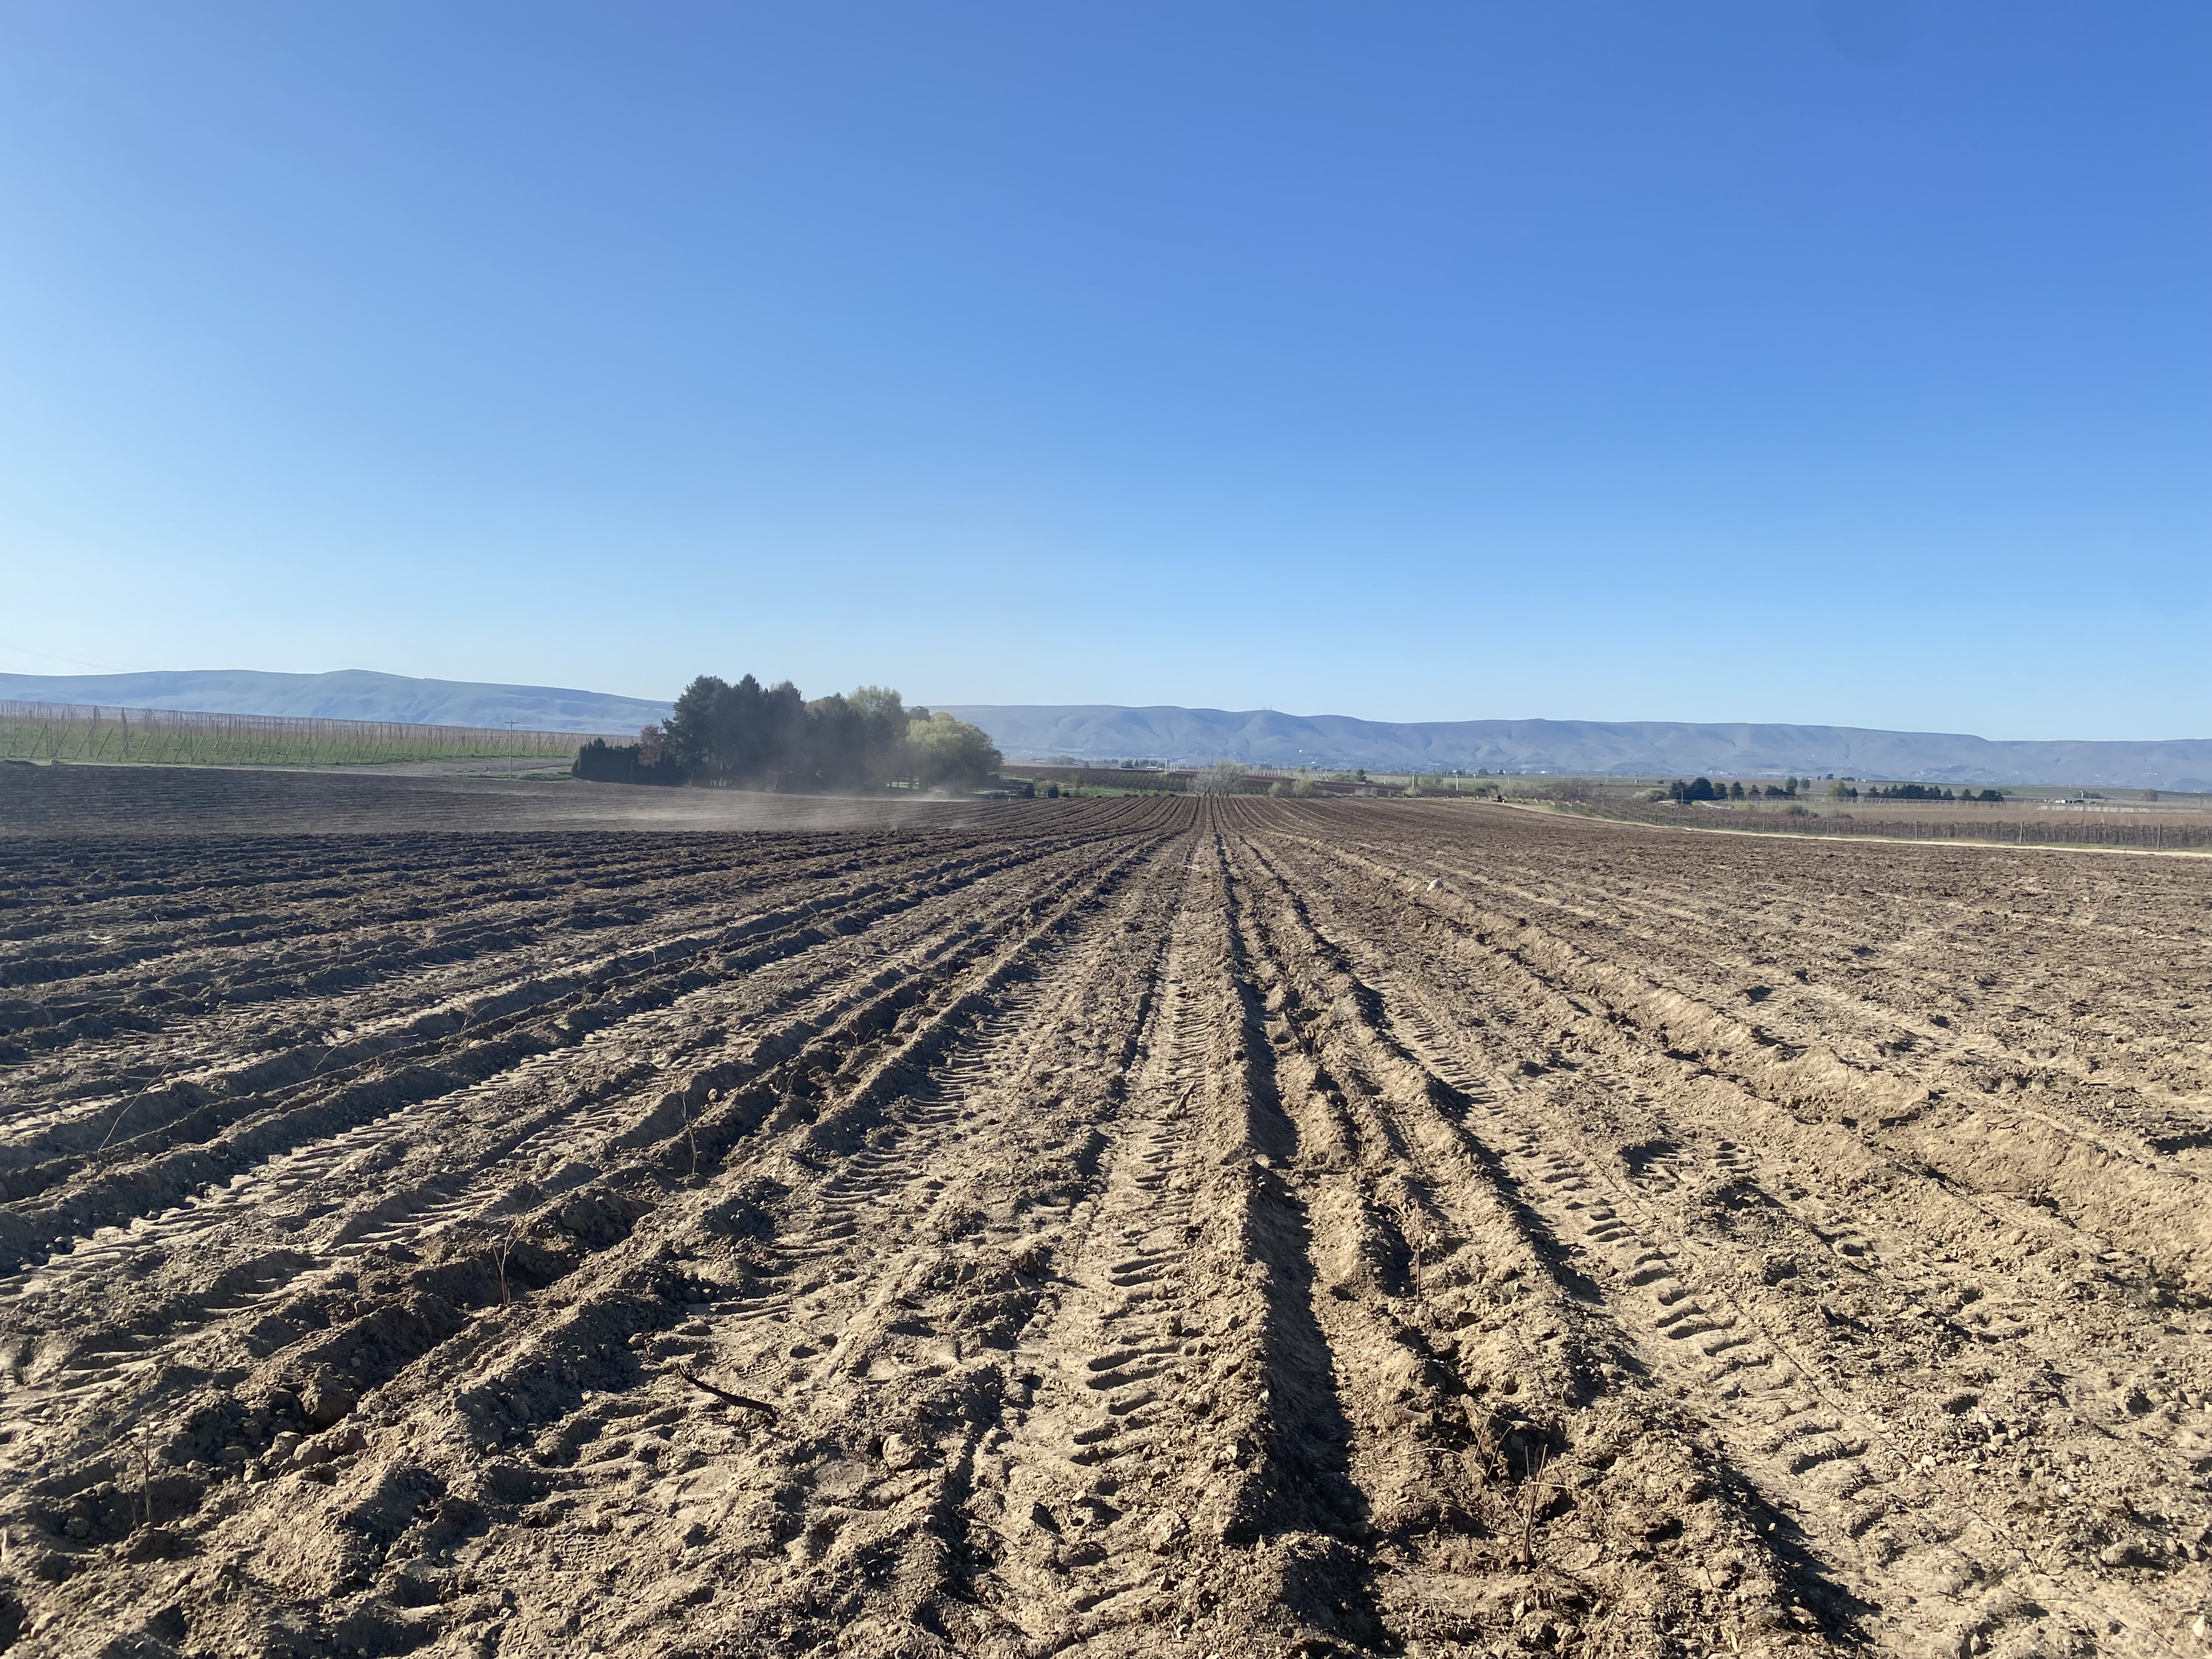 A dust devil rolls through an open expanse in late April on Jim Willard’s farm north of Prosser, Washington. This is where nearly 40-year-old pinot noir used to be rooted but Willard pushed it out because there is not enough irrigation water this year and it wasn’t as productive as some of his other crops. 